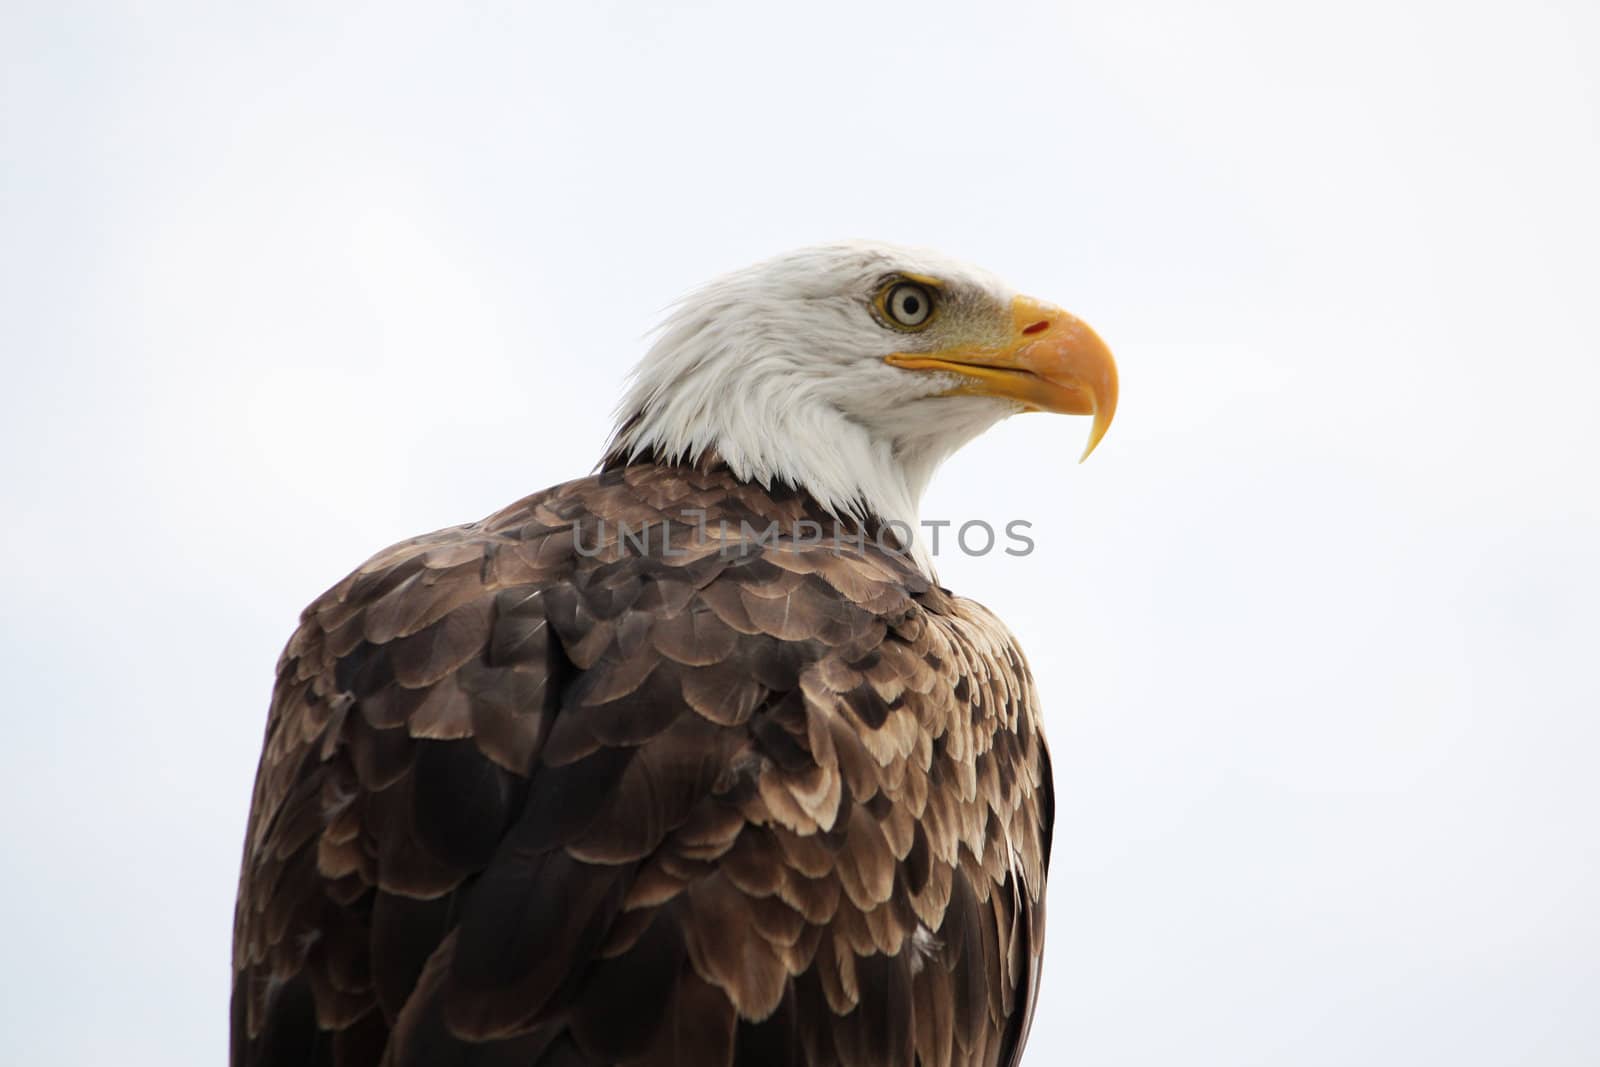 View of an American bald eagle bird of prey on top of a house.